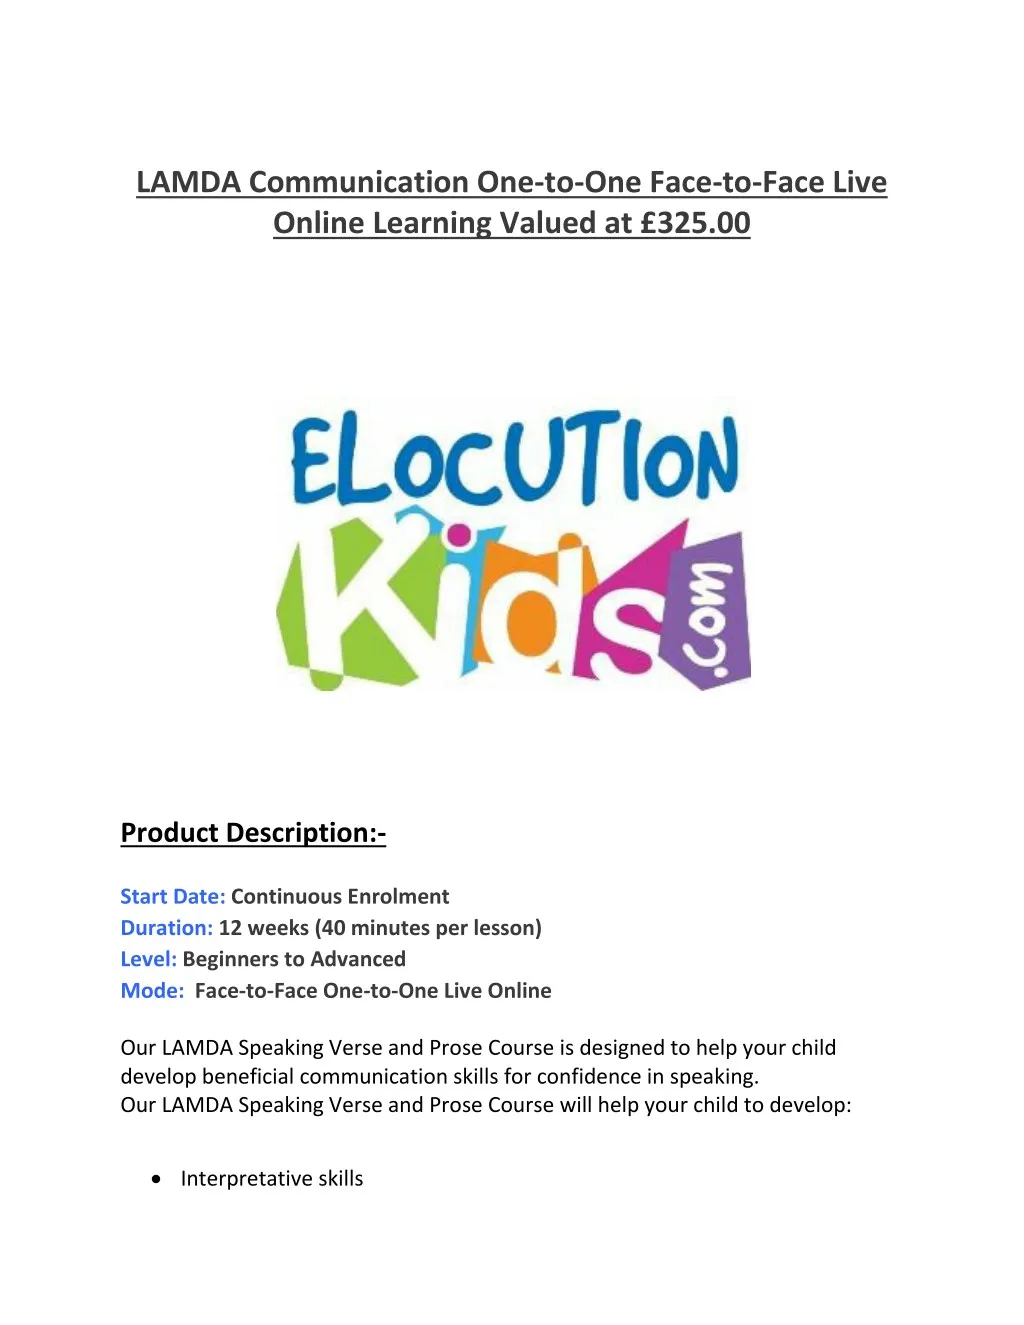 lamda communication one to one face to face live